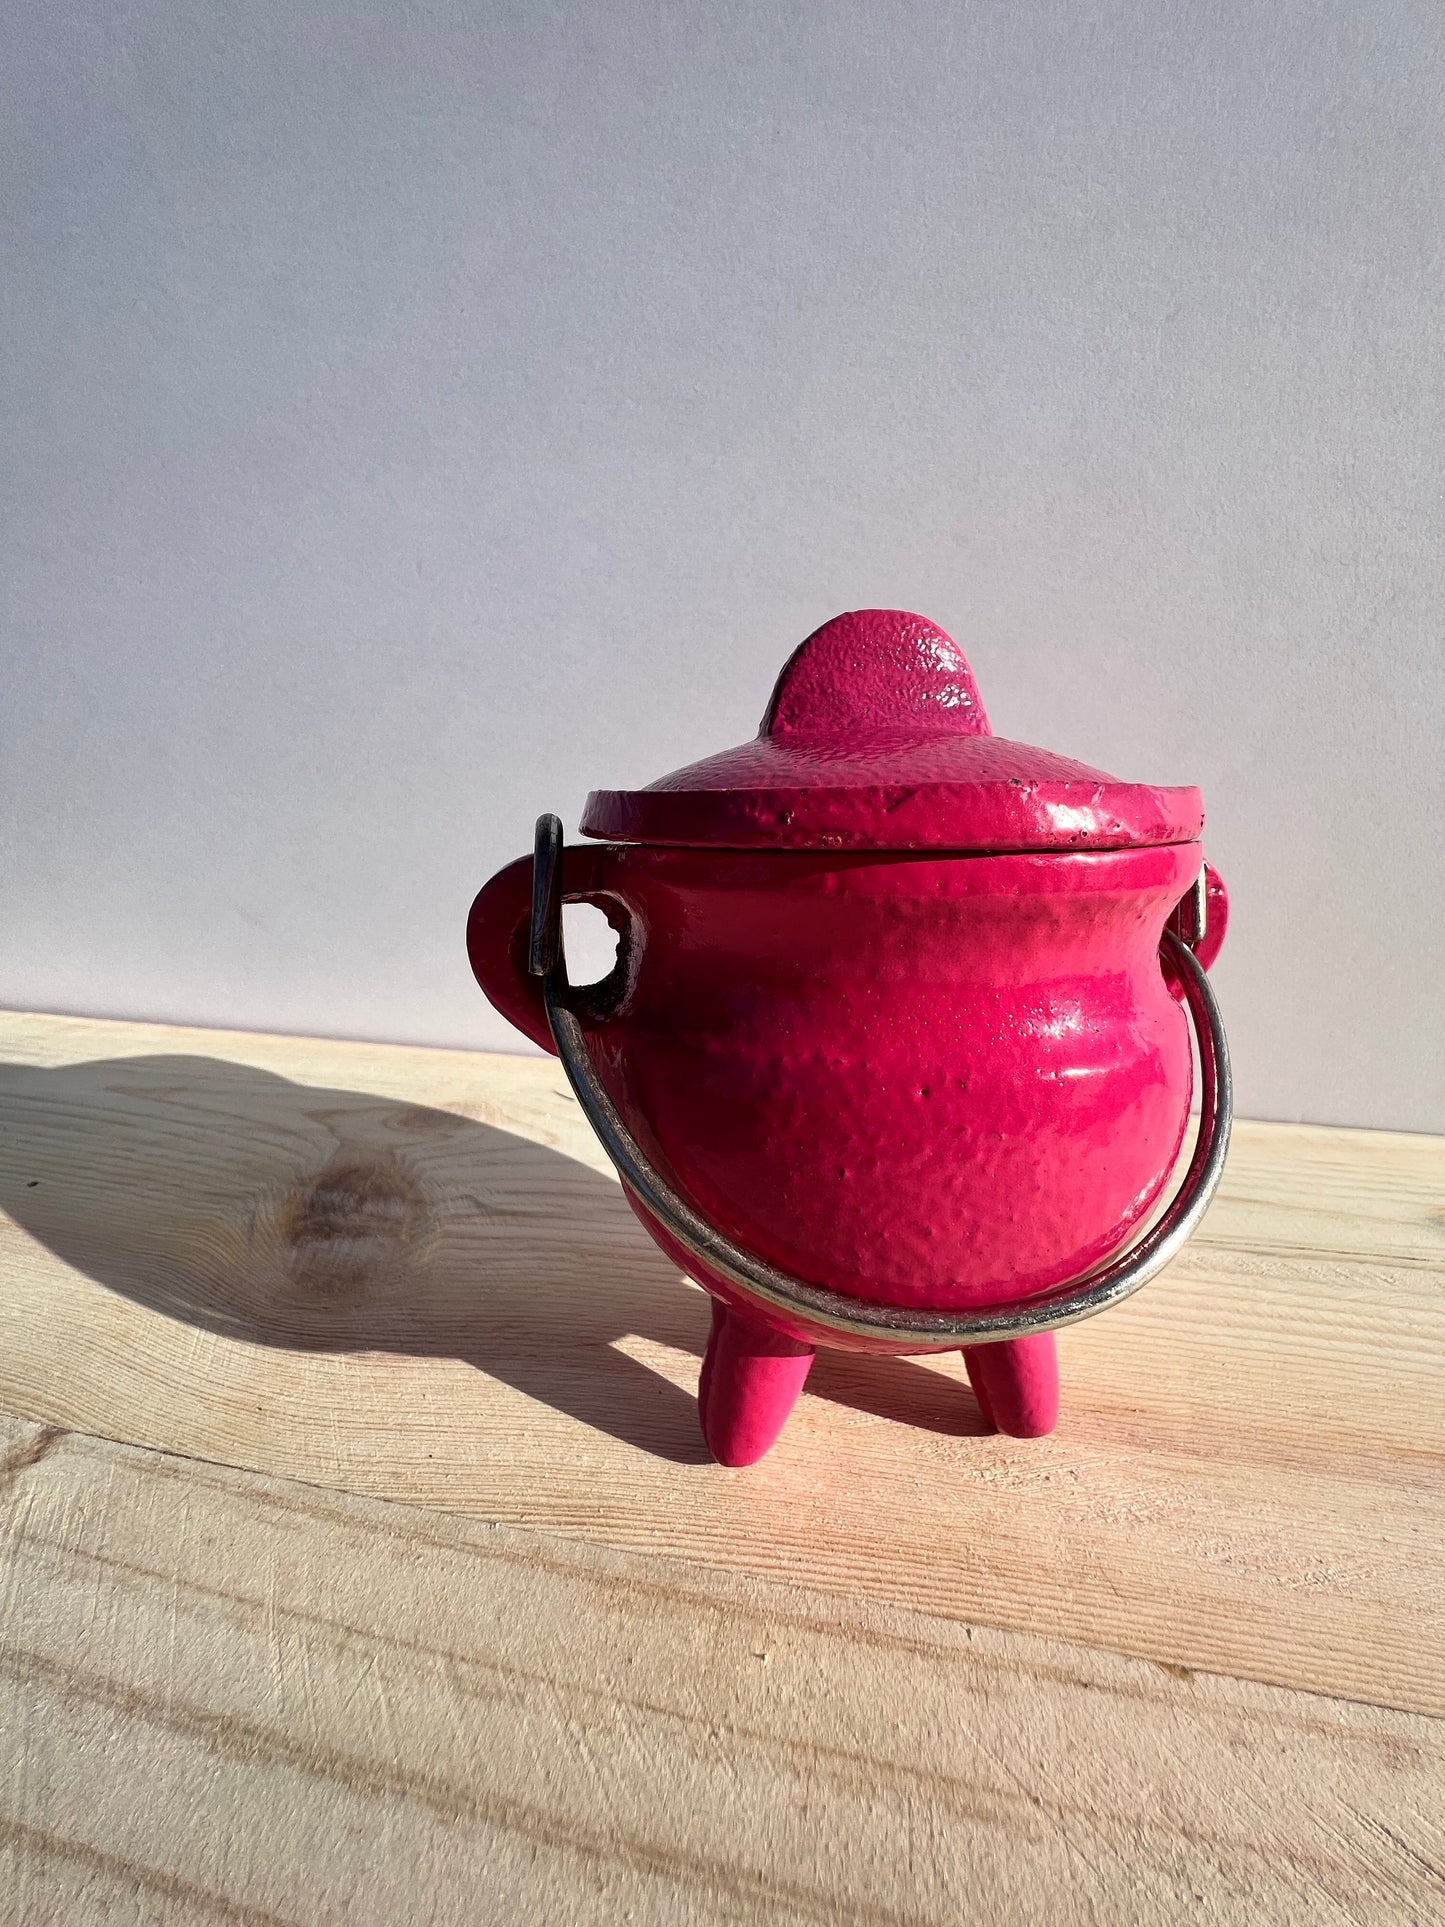 A pink cauldron with a handle.